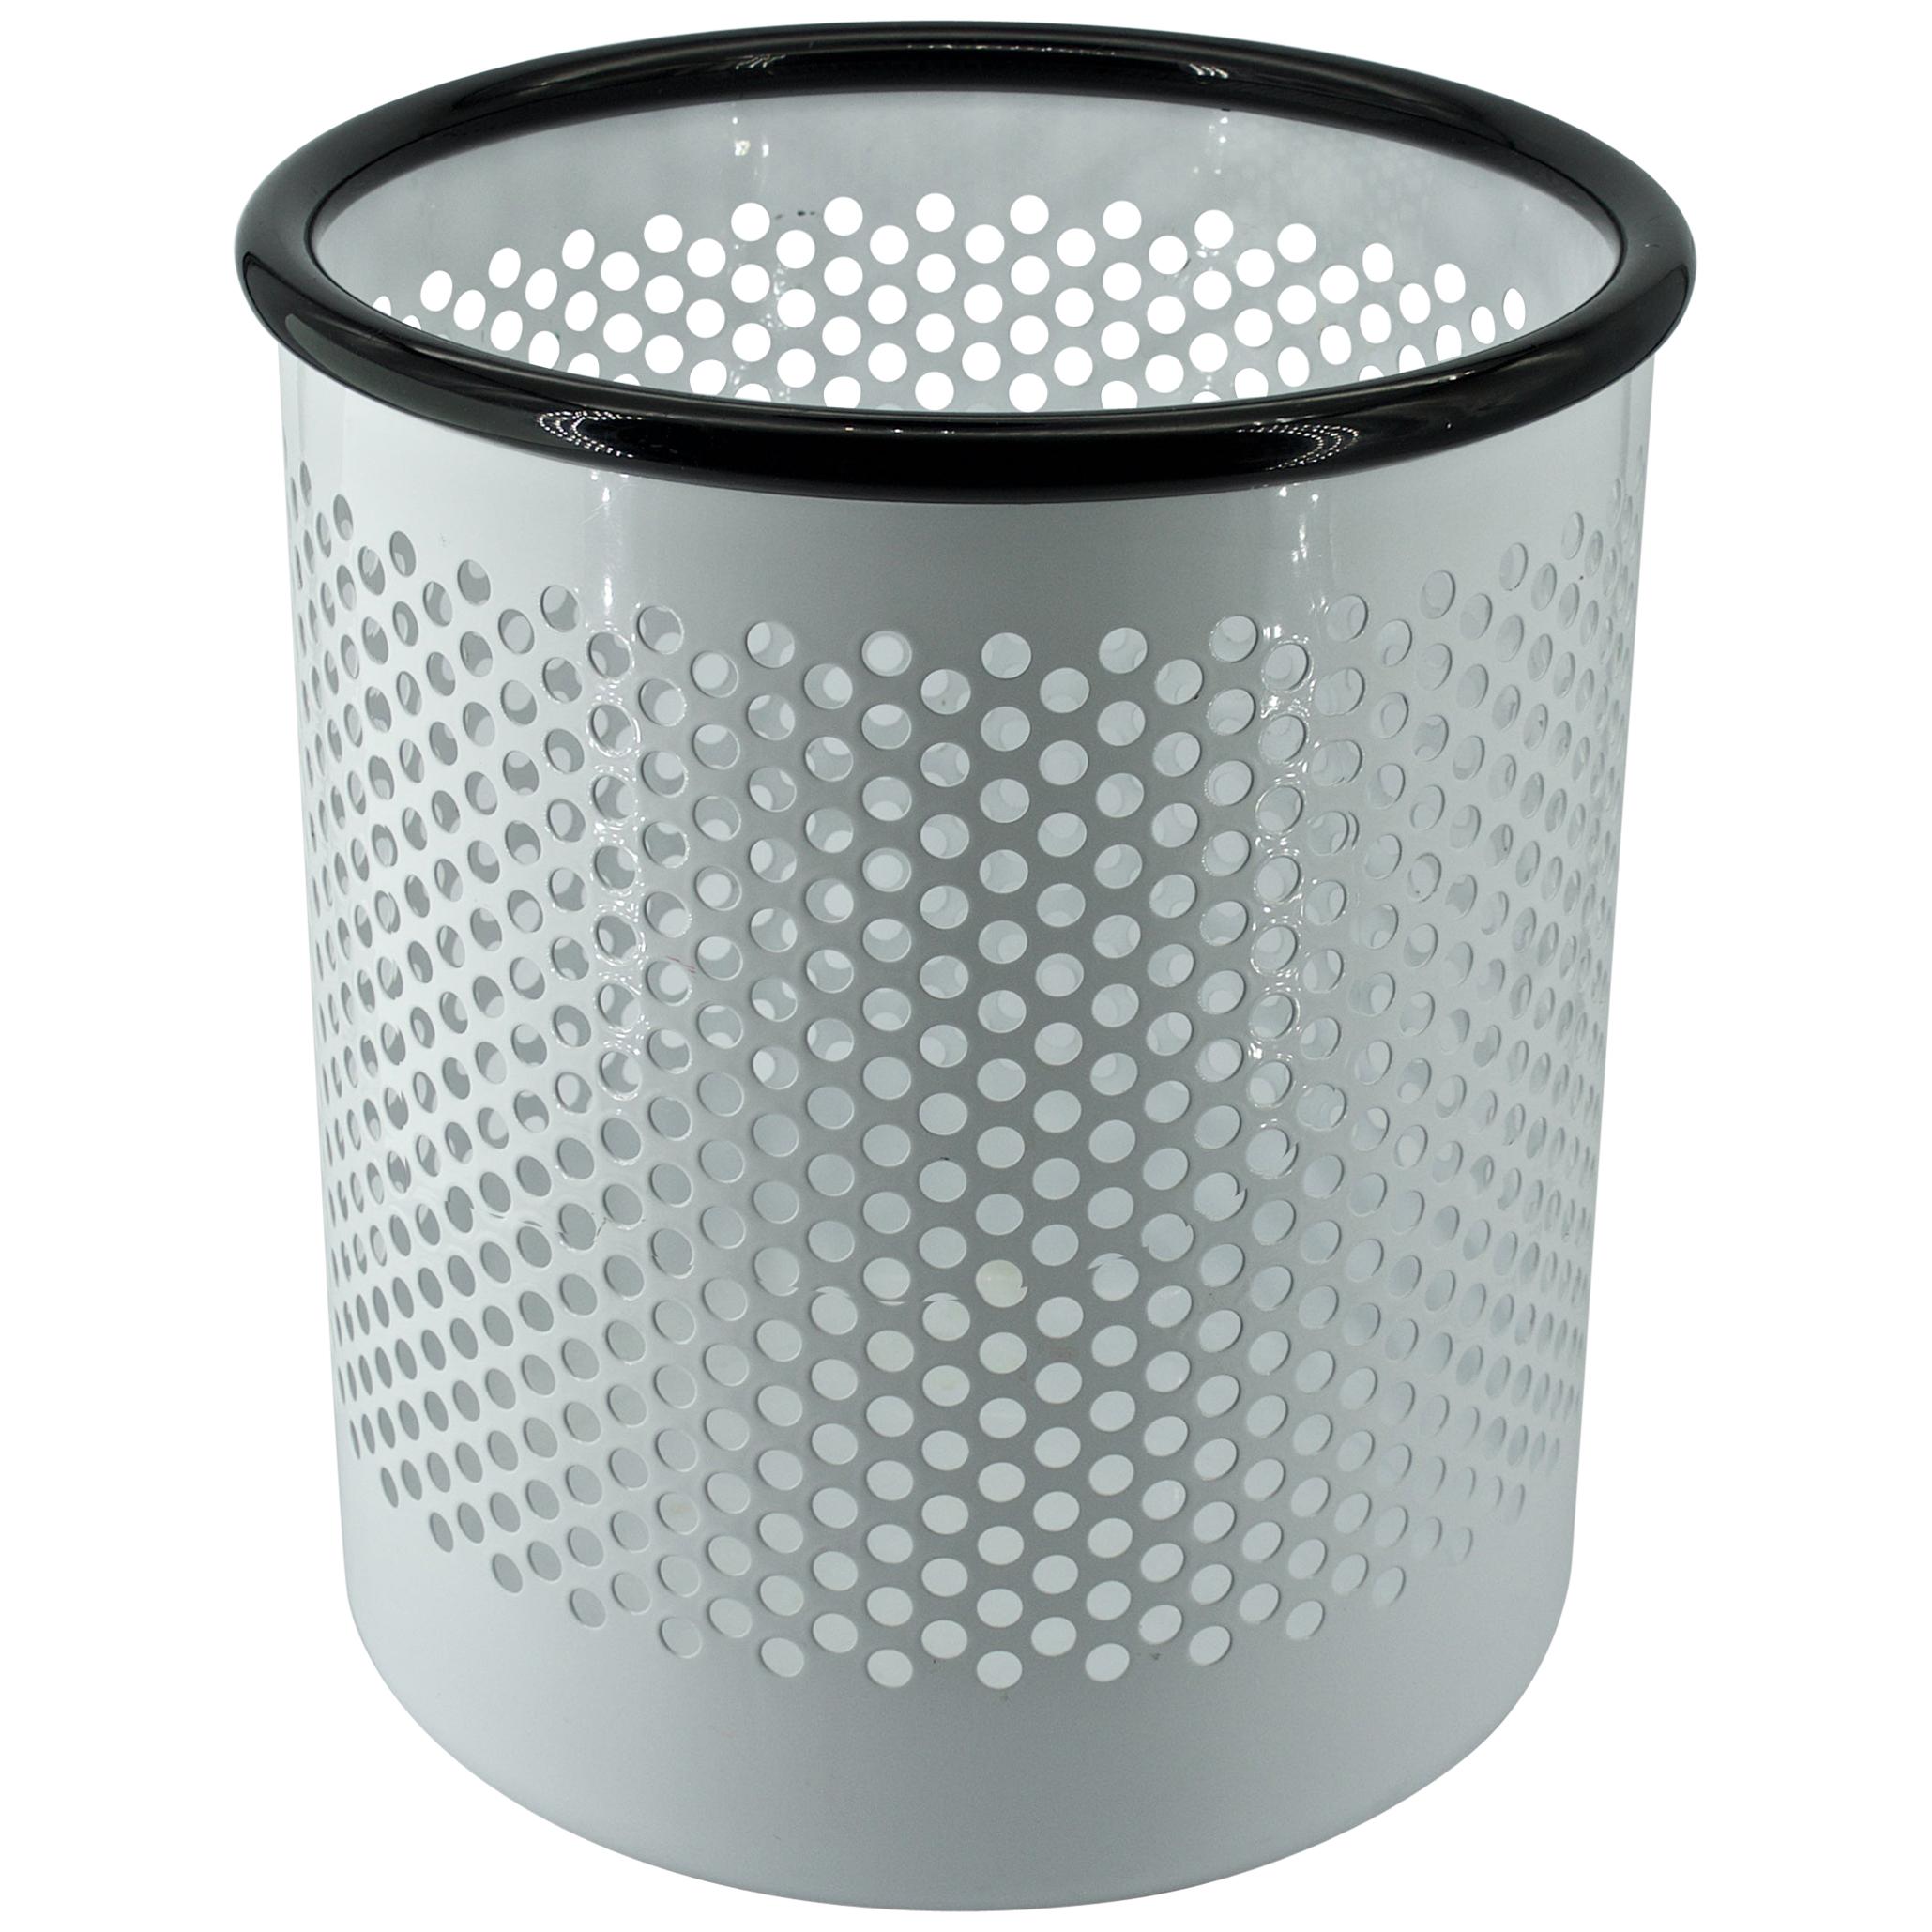 1980s White Perforated Metal Office Wastebasket Trash Can Italy Memphis Sottsass For Sale